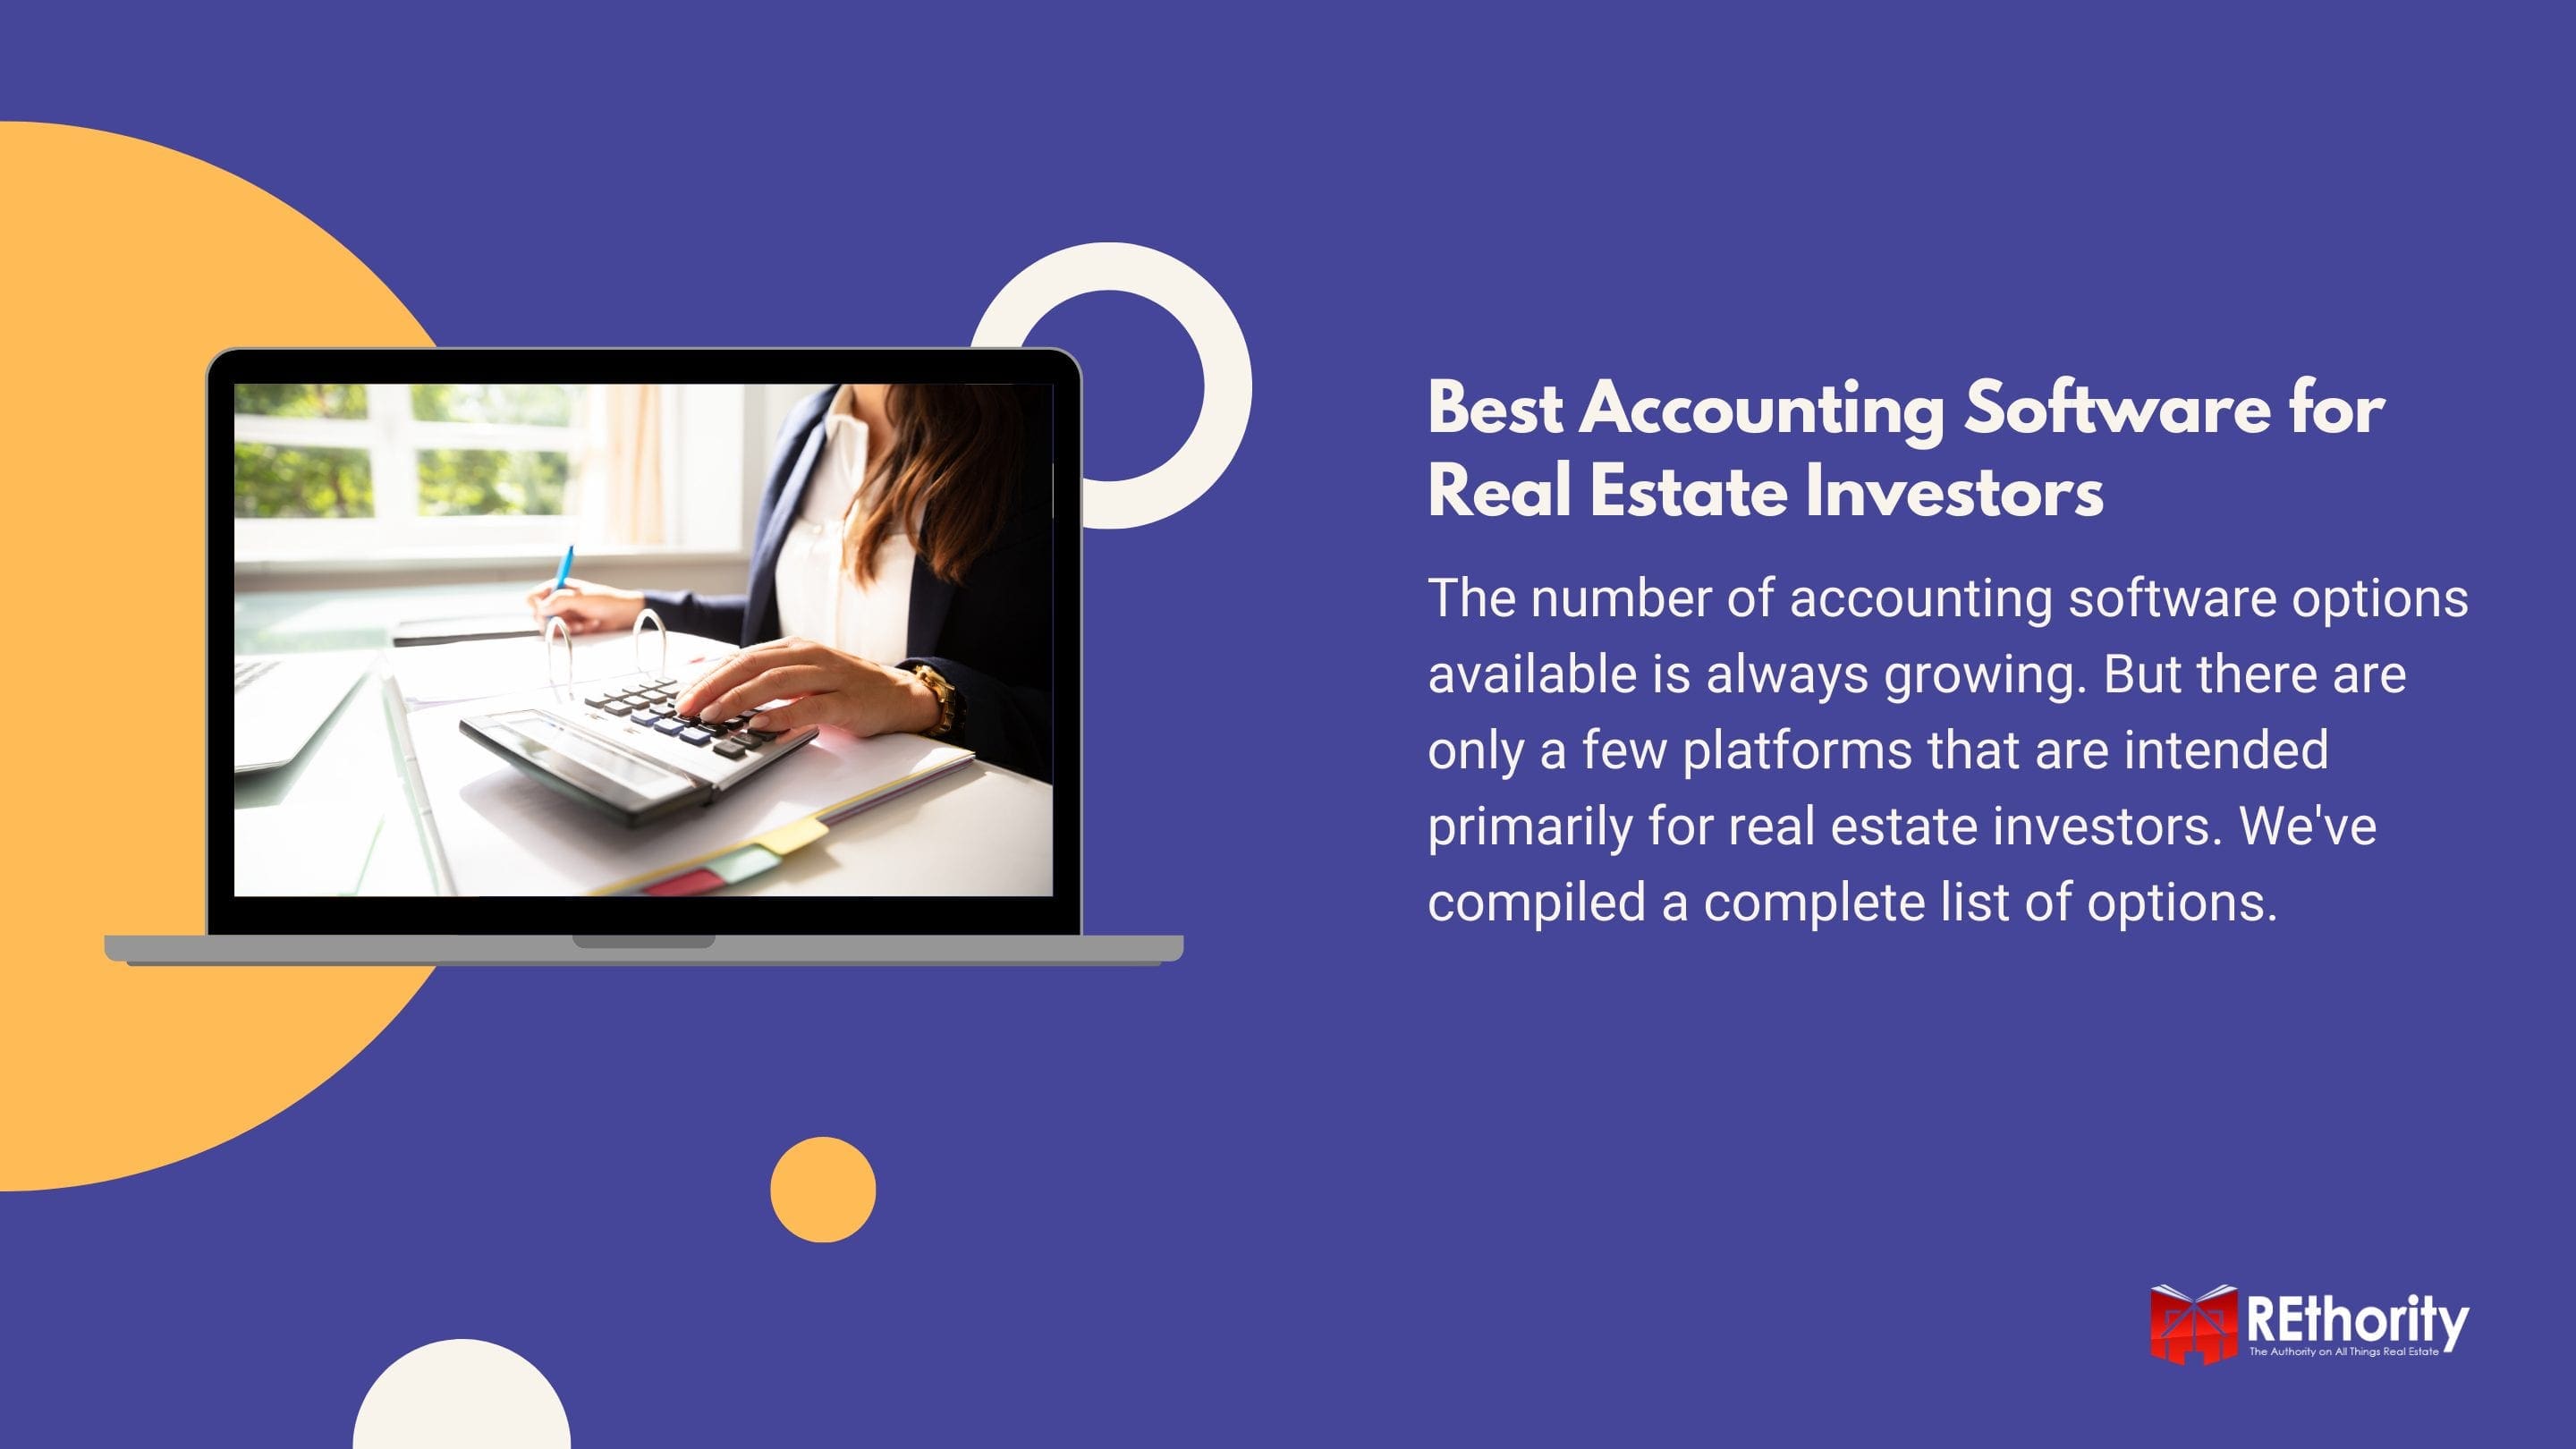 Best Accounting Software for Real Estate Investors graphic with a photo of a woman doing accounting displayed on a laptop